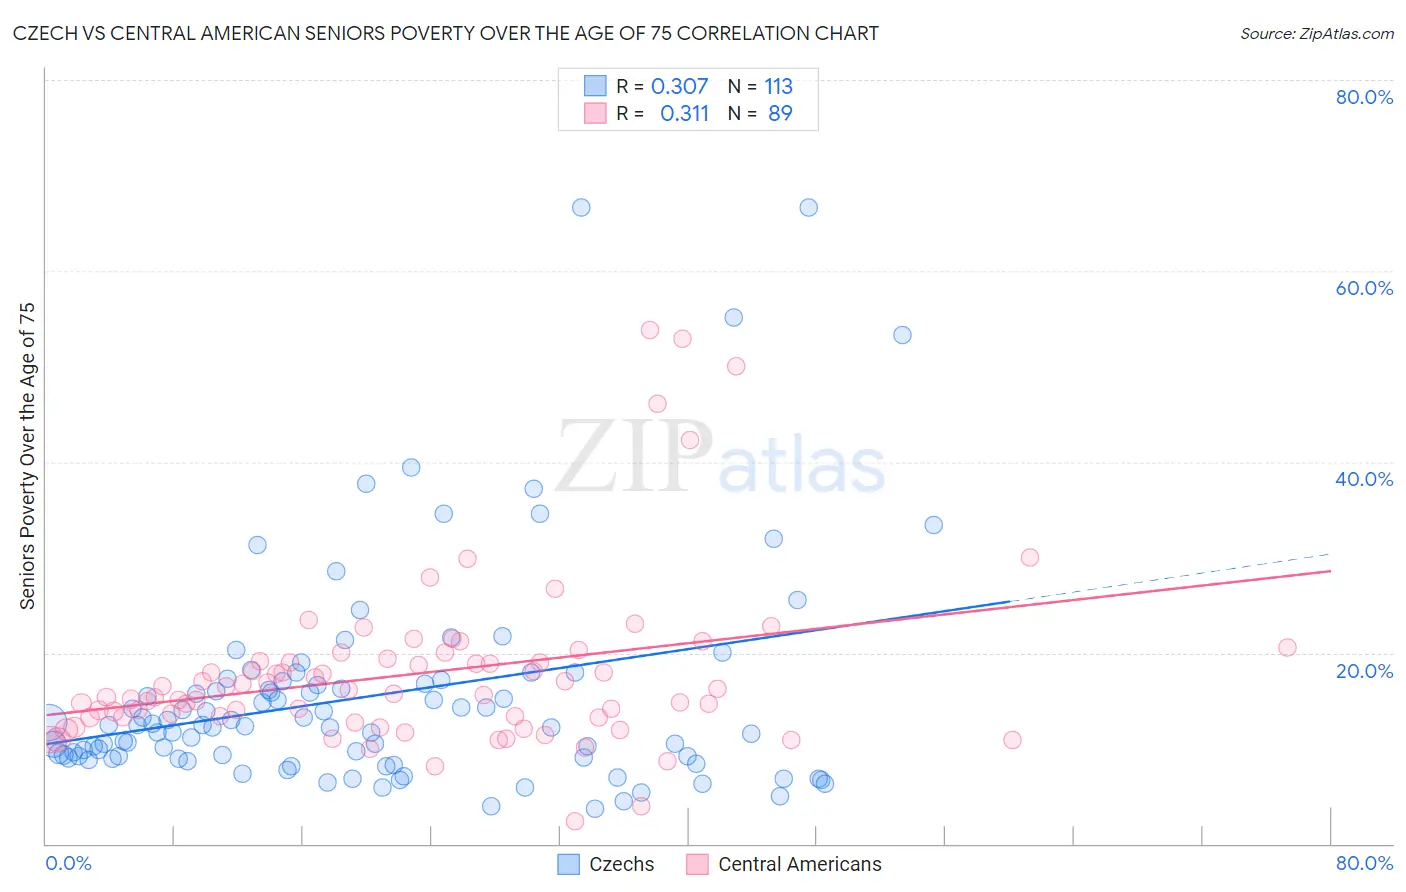 Czech vs Central American Seniors Poverty Over the Age of 75